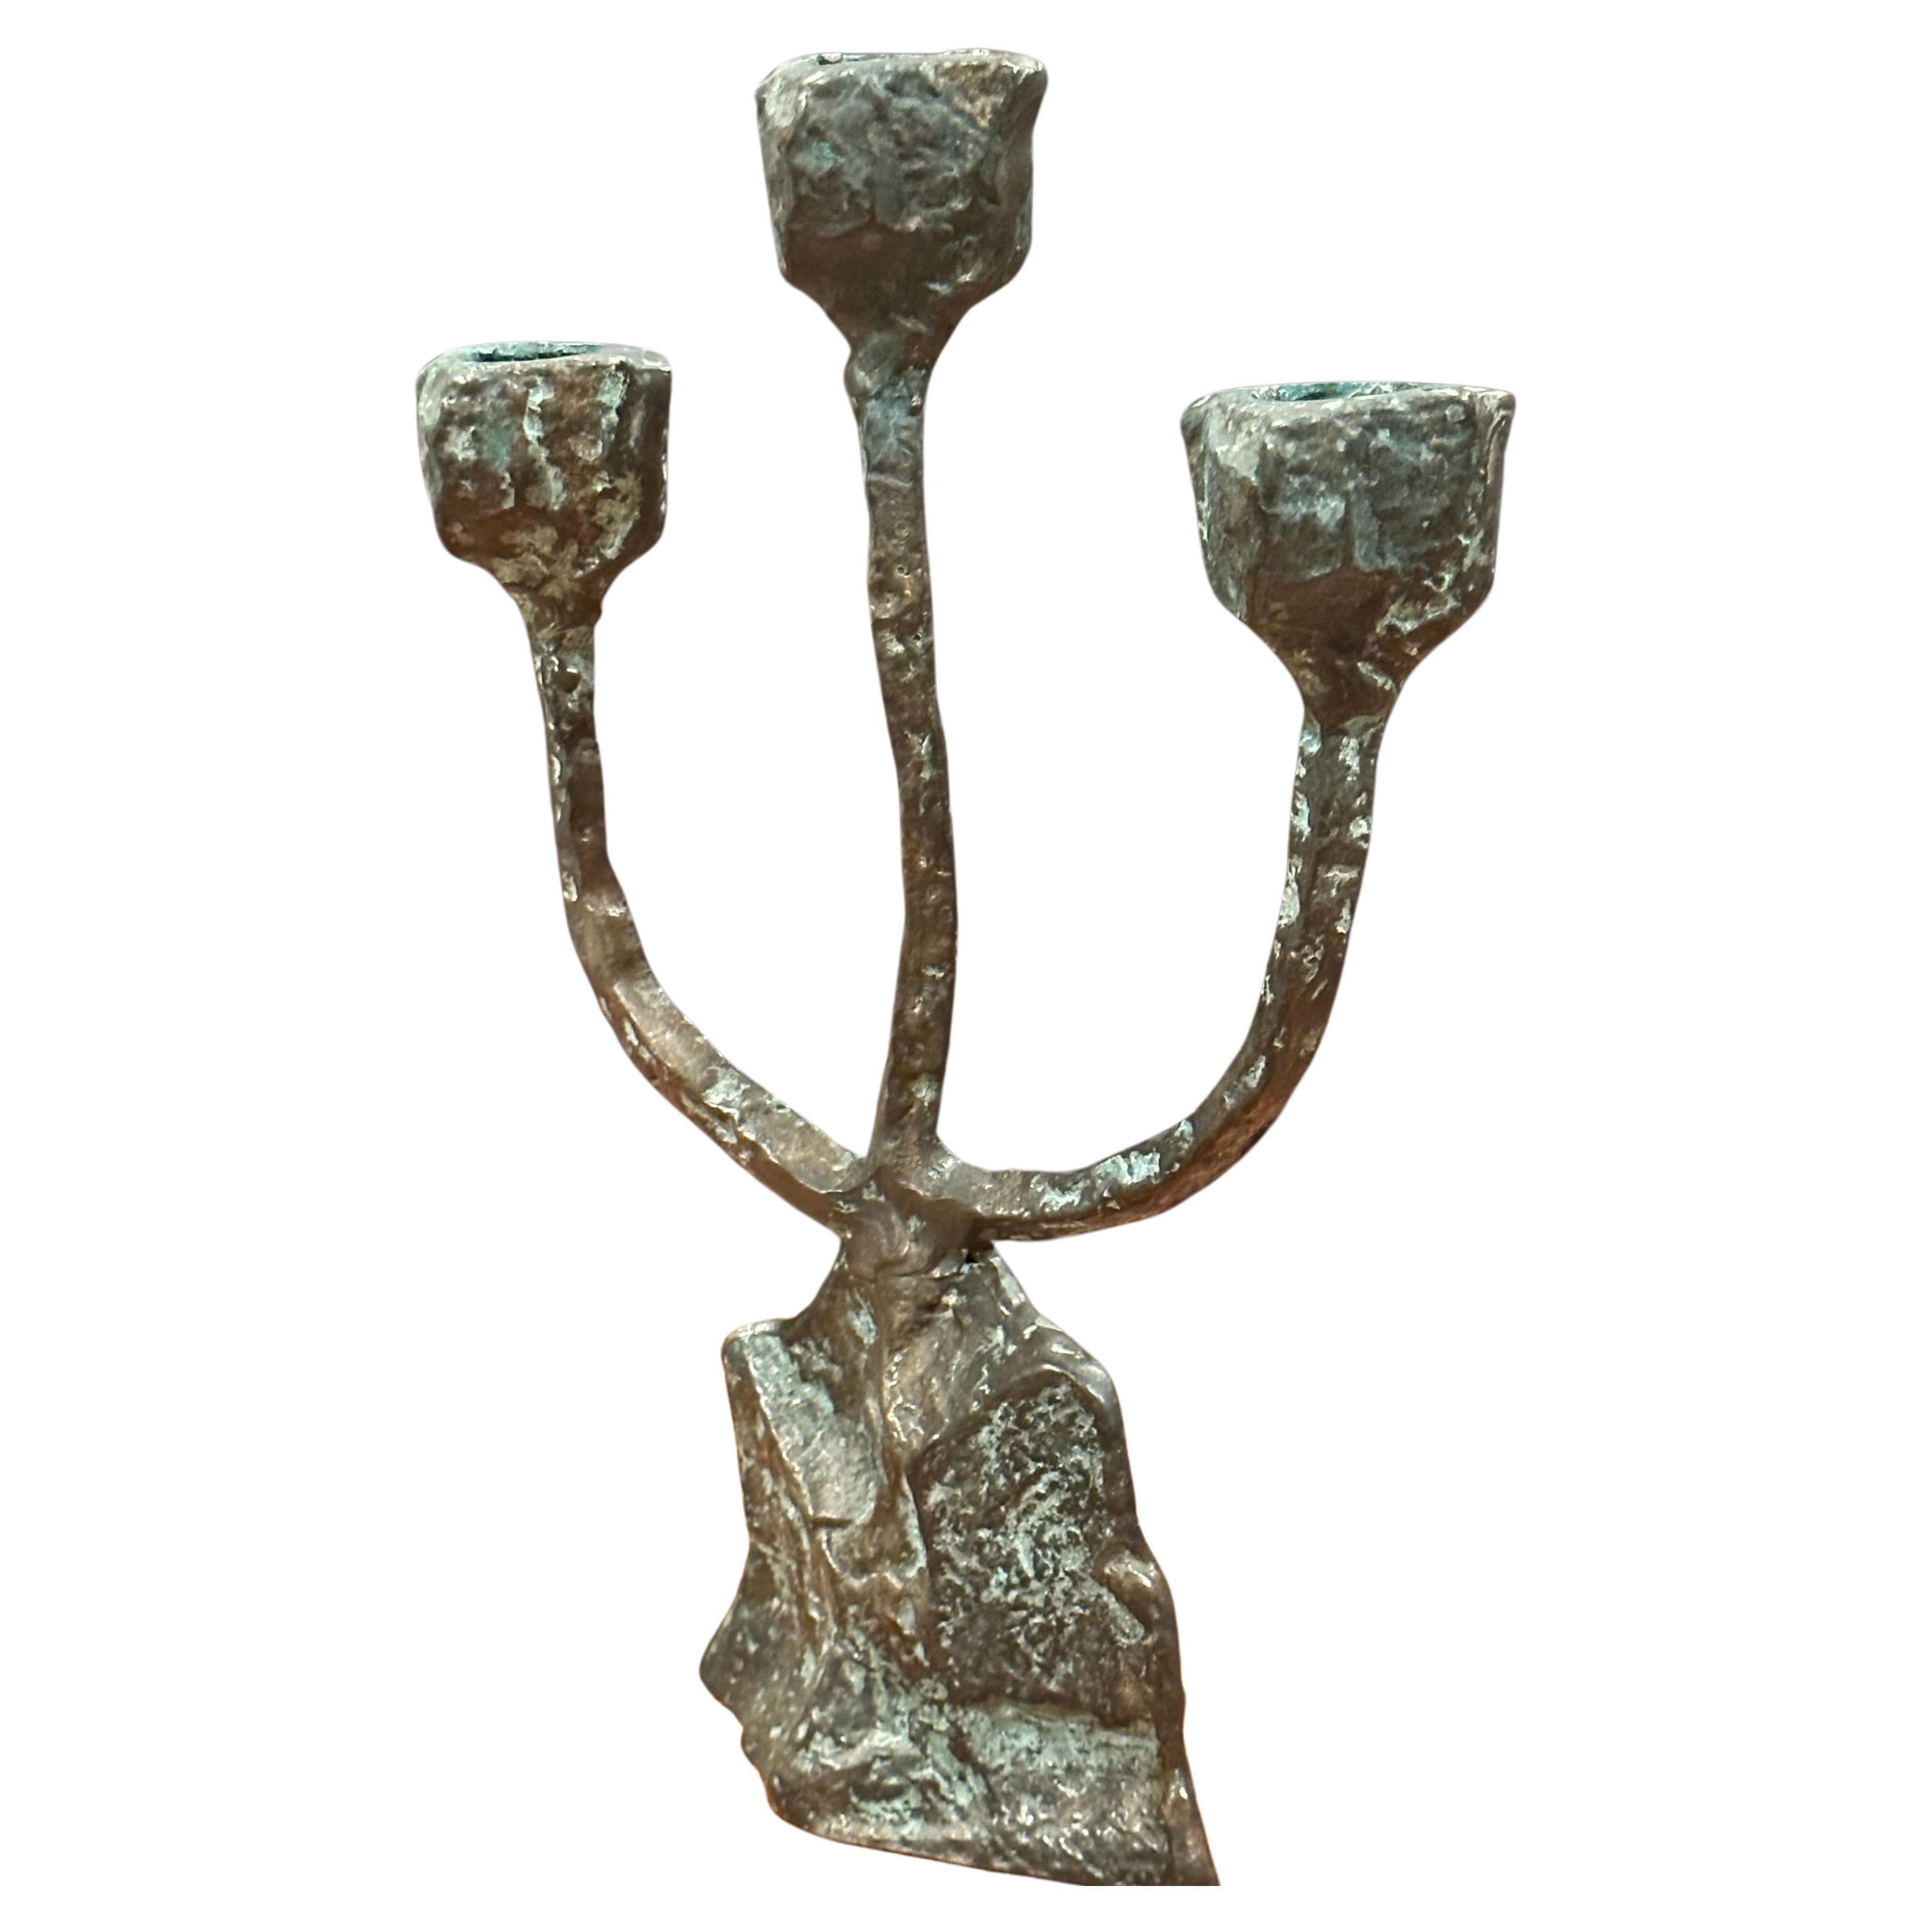 Patinated bronze brutalist triple candelabra in the style of Paul Evans, circa 1970s.  This unique looking piece is in very good vintage condition with a wonderful patina and measure 7